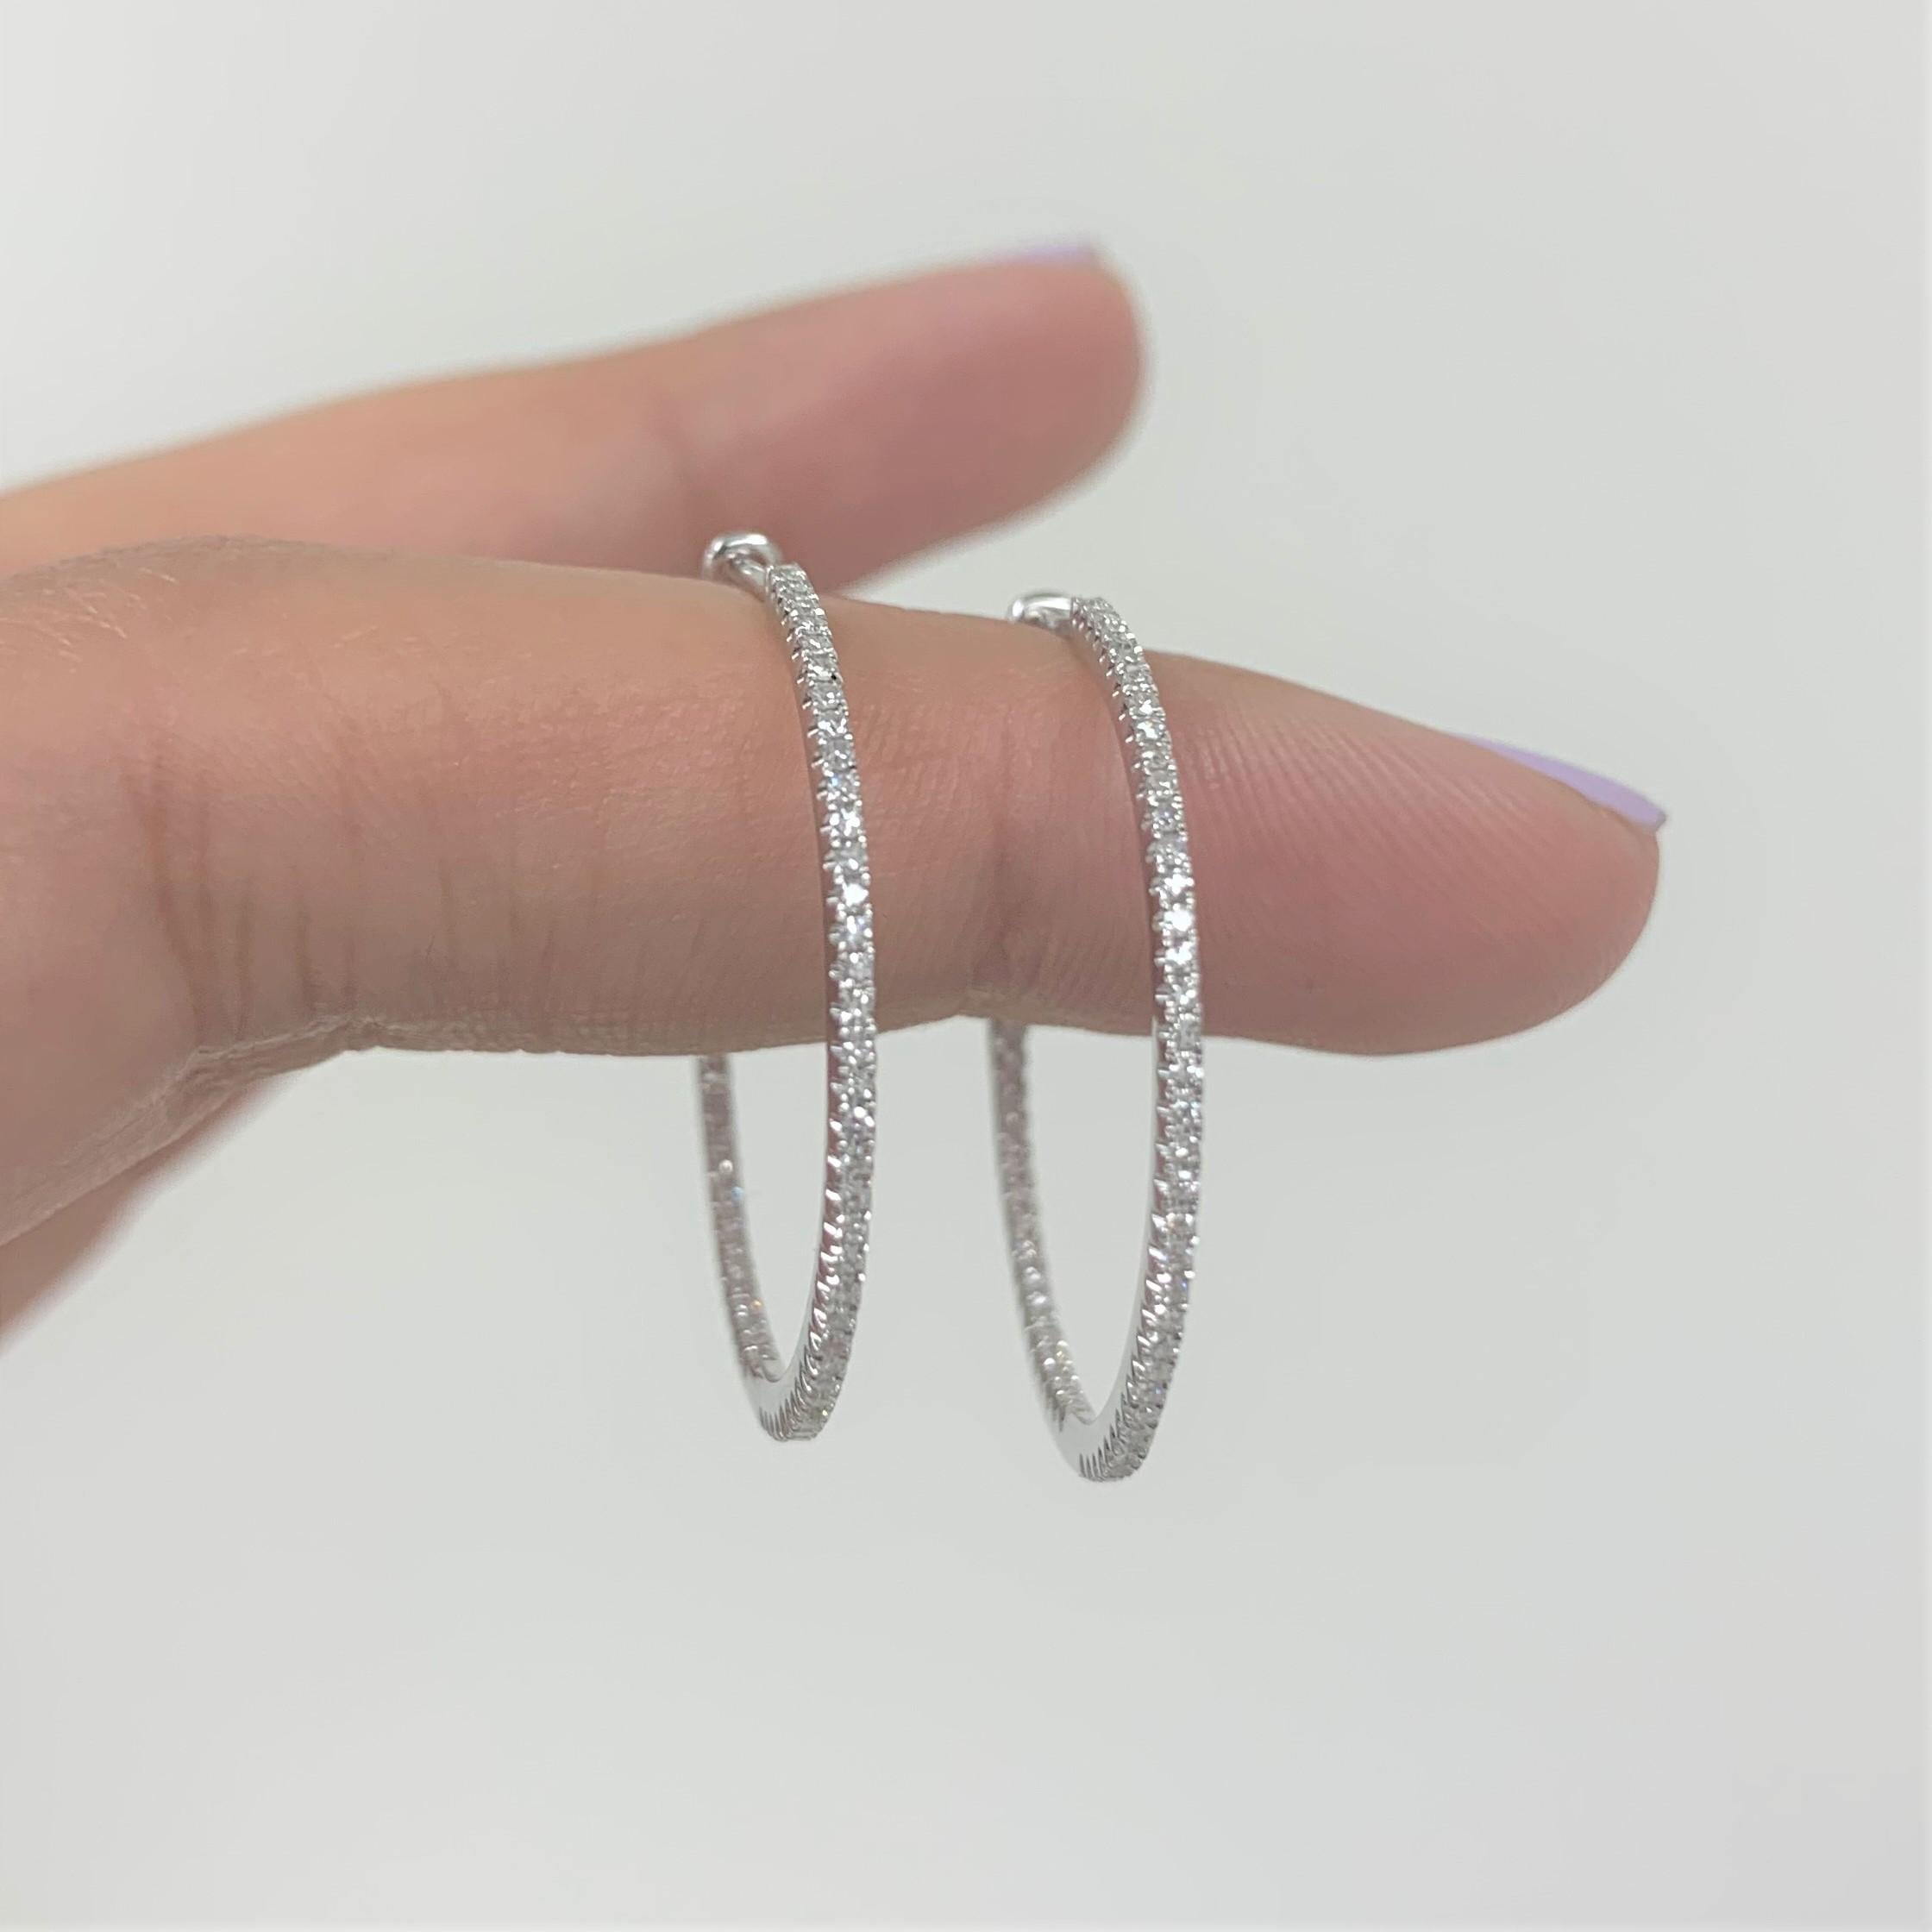 Light up your favorite looks with the brilliance of diamonds! Shimmering and bright, these gorgeous narrow round hoops glisten with approximately 0.30ct diamonds along the outer edge. Diamond color and clarity is GH SI1-SI2. Lever backs provide a